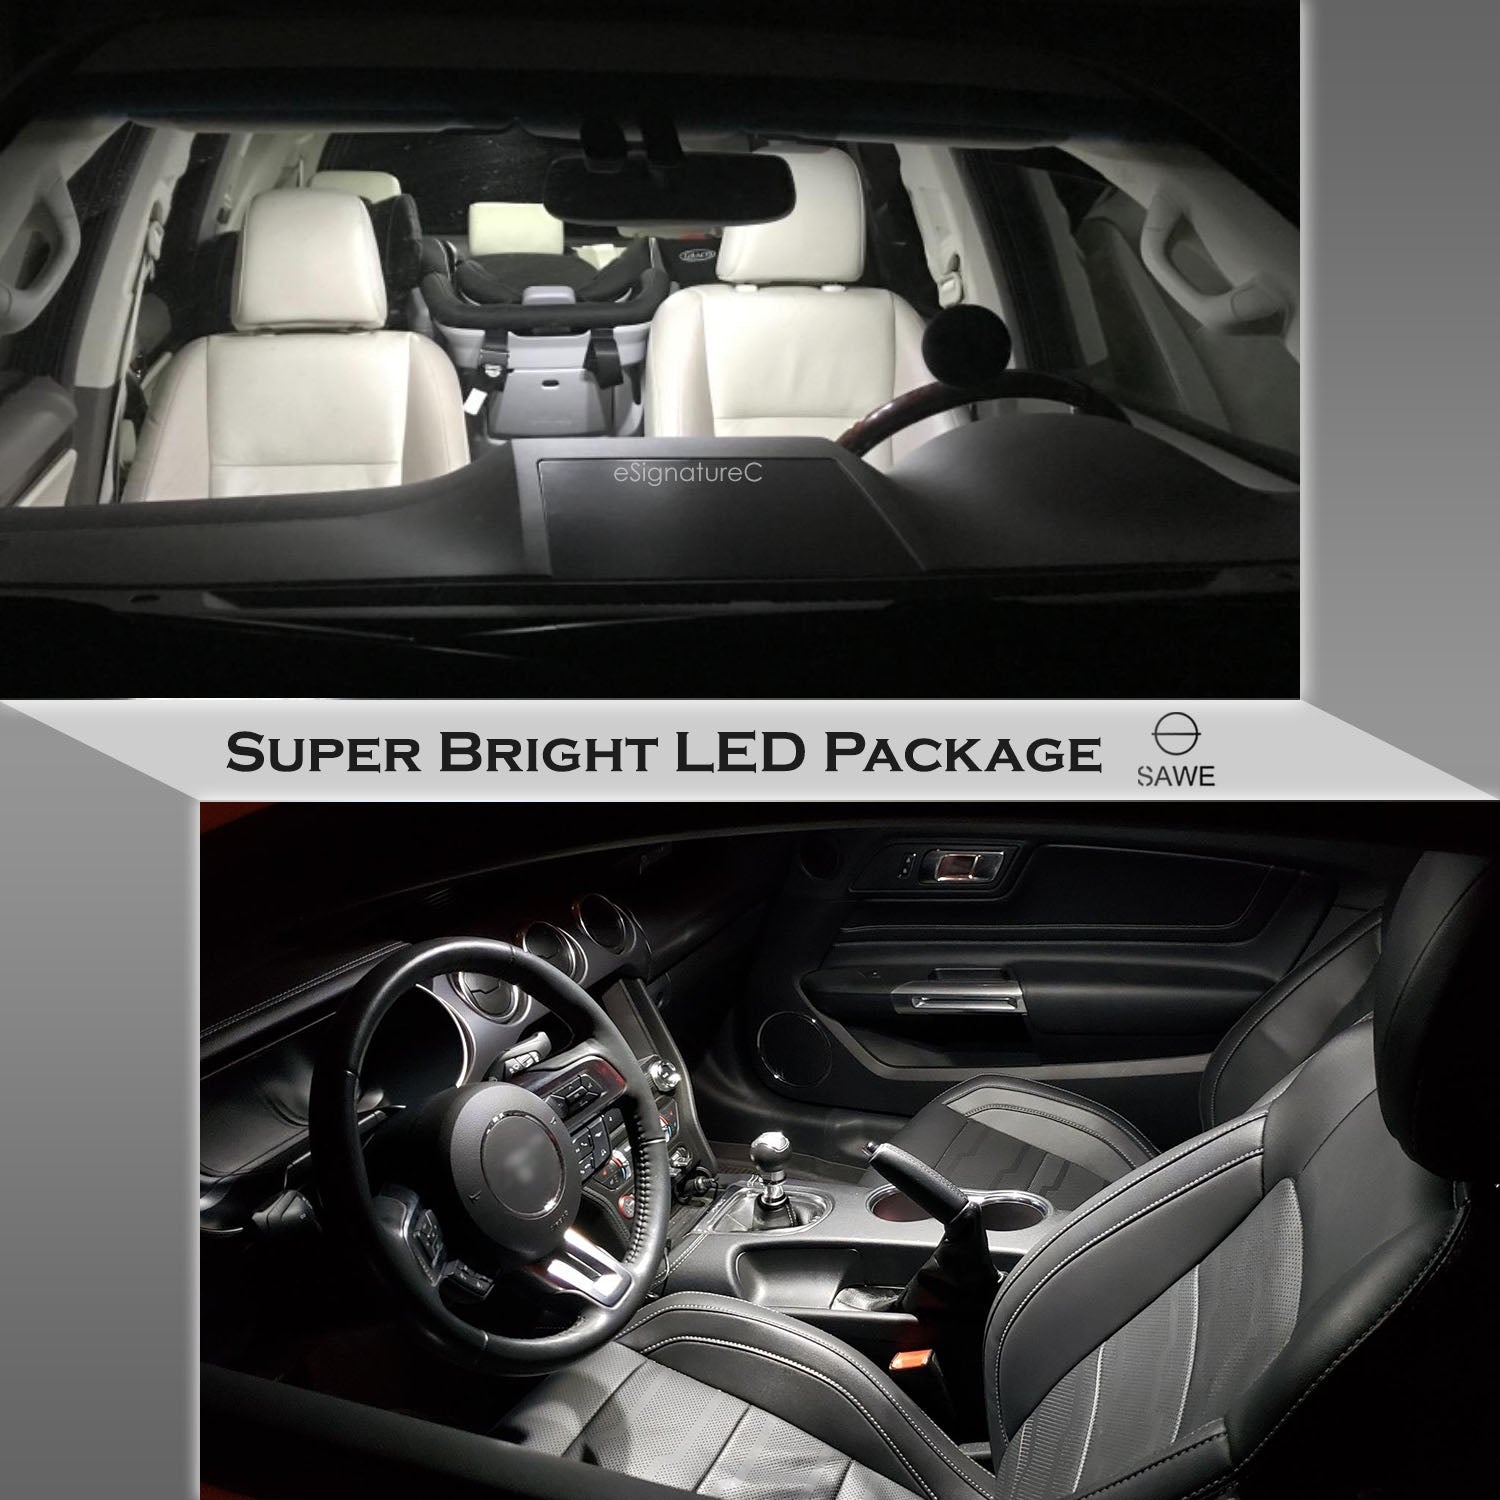 For Ford Mustang Interior LED Lights - Dome & Map Light Bulbs Package Kit for 2005 - 2009 - White